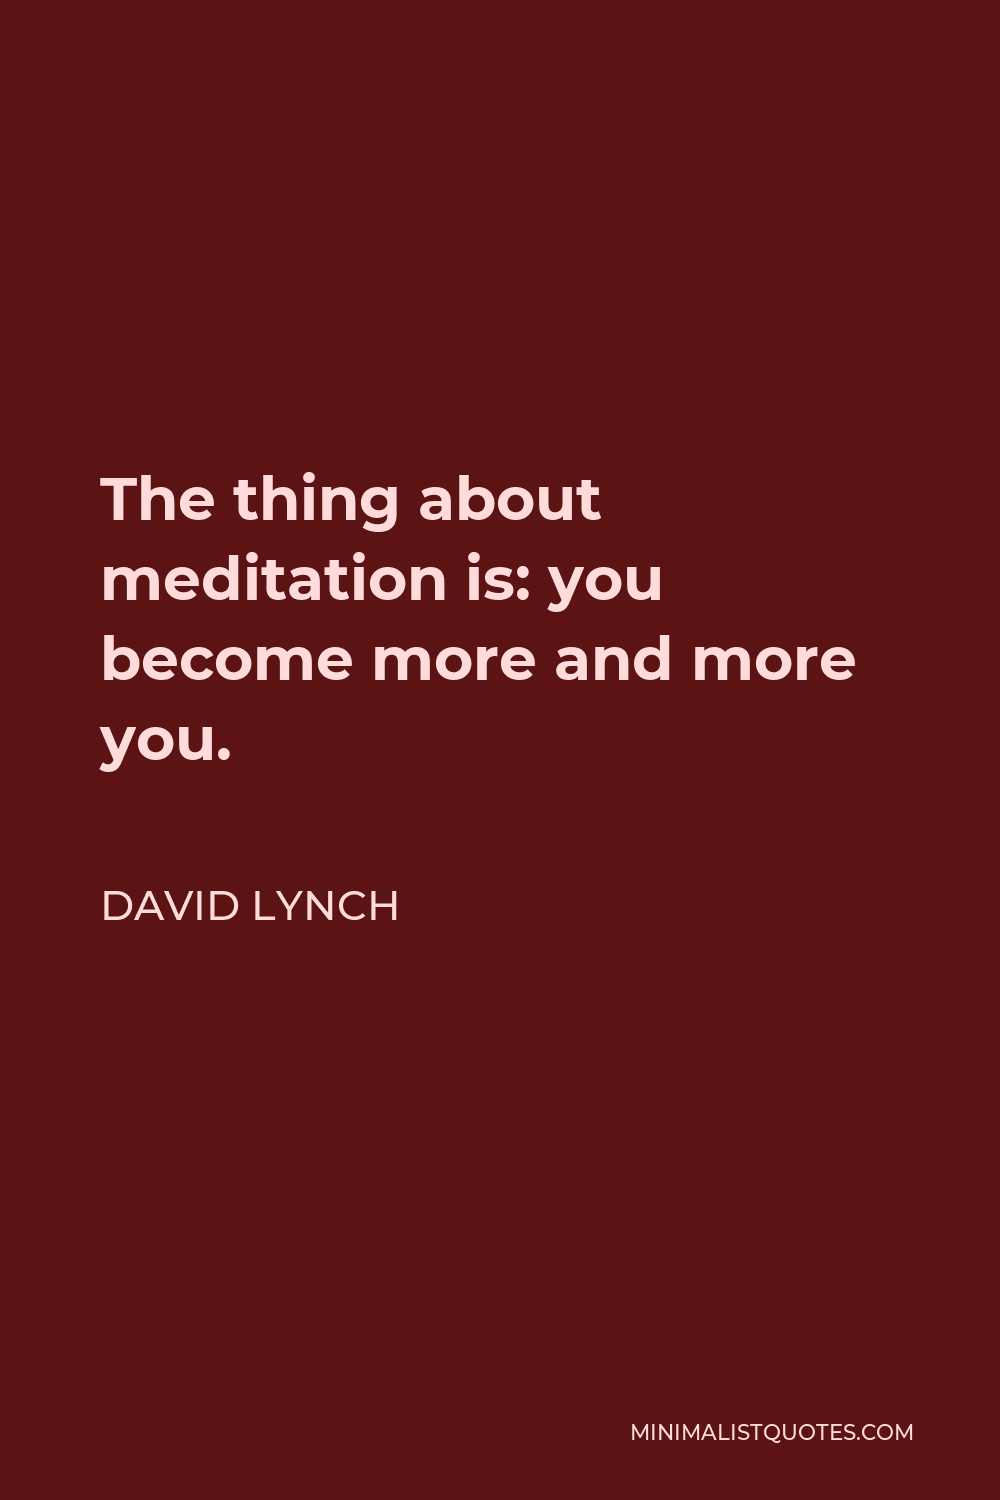 David Lynch Quote - The thing about meditation is: you become more and more you.